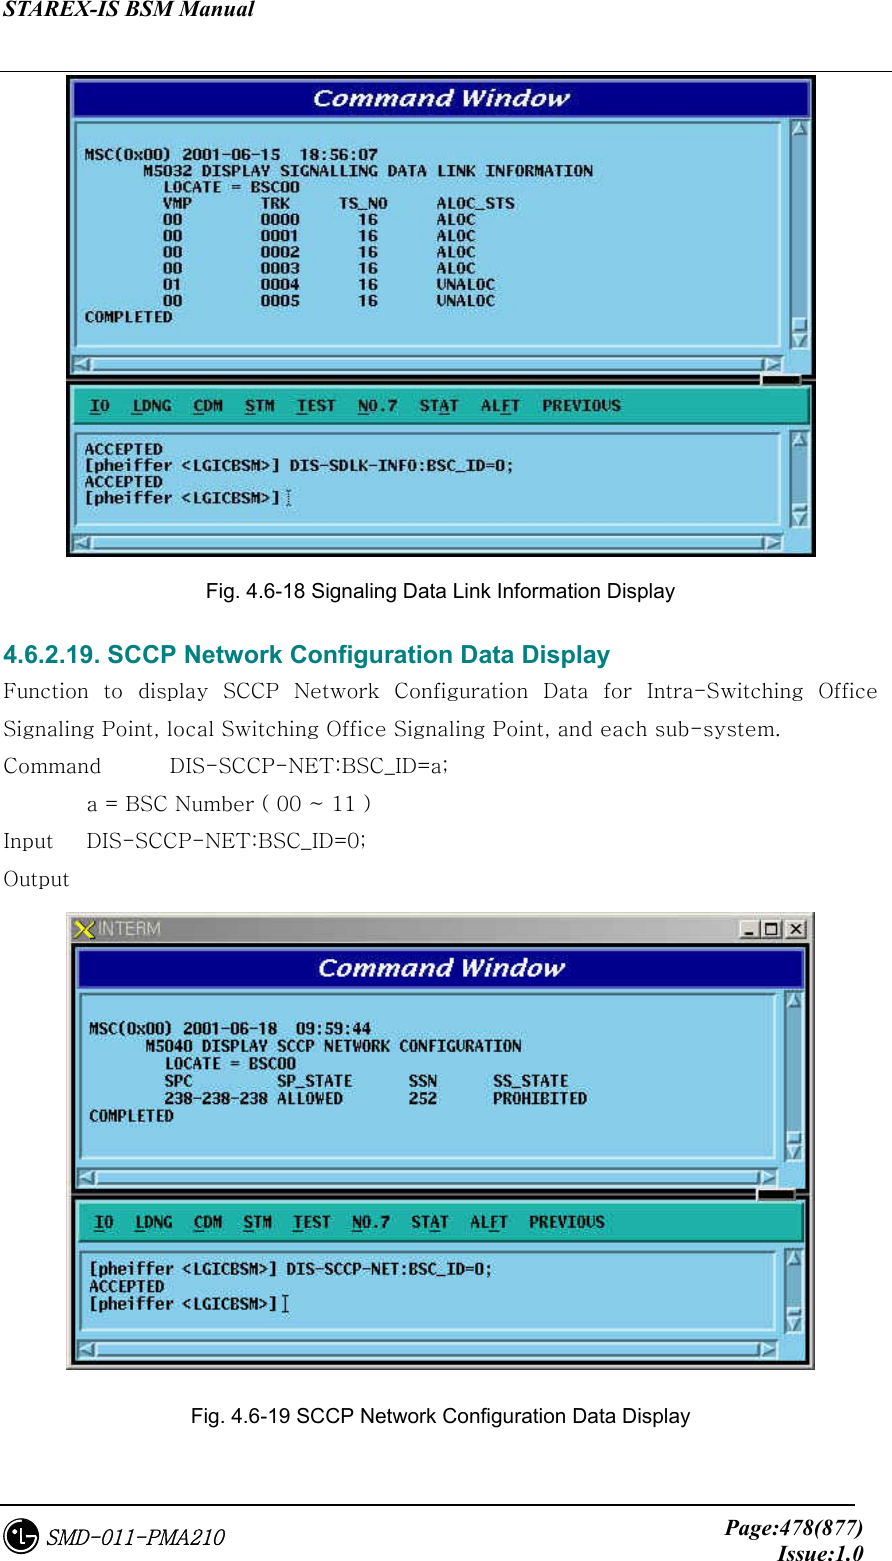 STAREX-IS BSM Manual     Page:478(877)Issue:1.0SMD-011-PMA210  Fig. 4.6-18 Signaling Data Link Information Display 4.6.2.19. SCCP Network Configuration Data Display Function  to  display  SCCP  Network  Configuration  Data  for  Intra-Switching  Office Signaling Point, local Switching Office Signaling Point, and each sub-system. Command  DIS-SCCP-NET:BSC_ID=a;   a = BSC Number ( 00 ~ 11 )   Input    DIS-SCCP-NET:BSC_ID=0; Output  Fig. 4.6-19 SCCP Network Configuration Data Display 